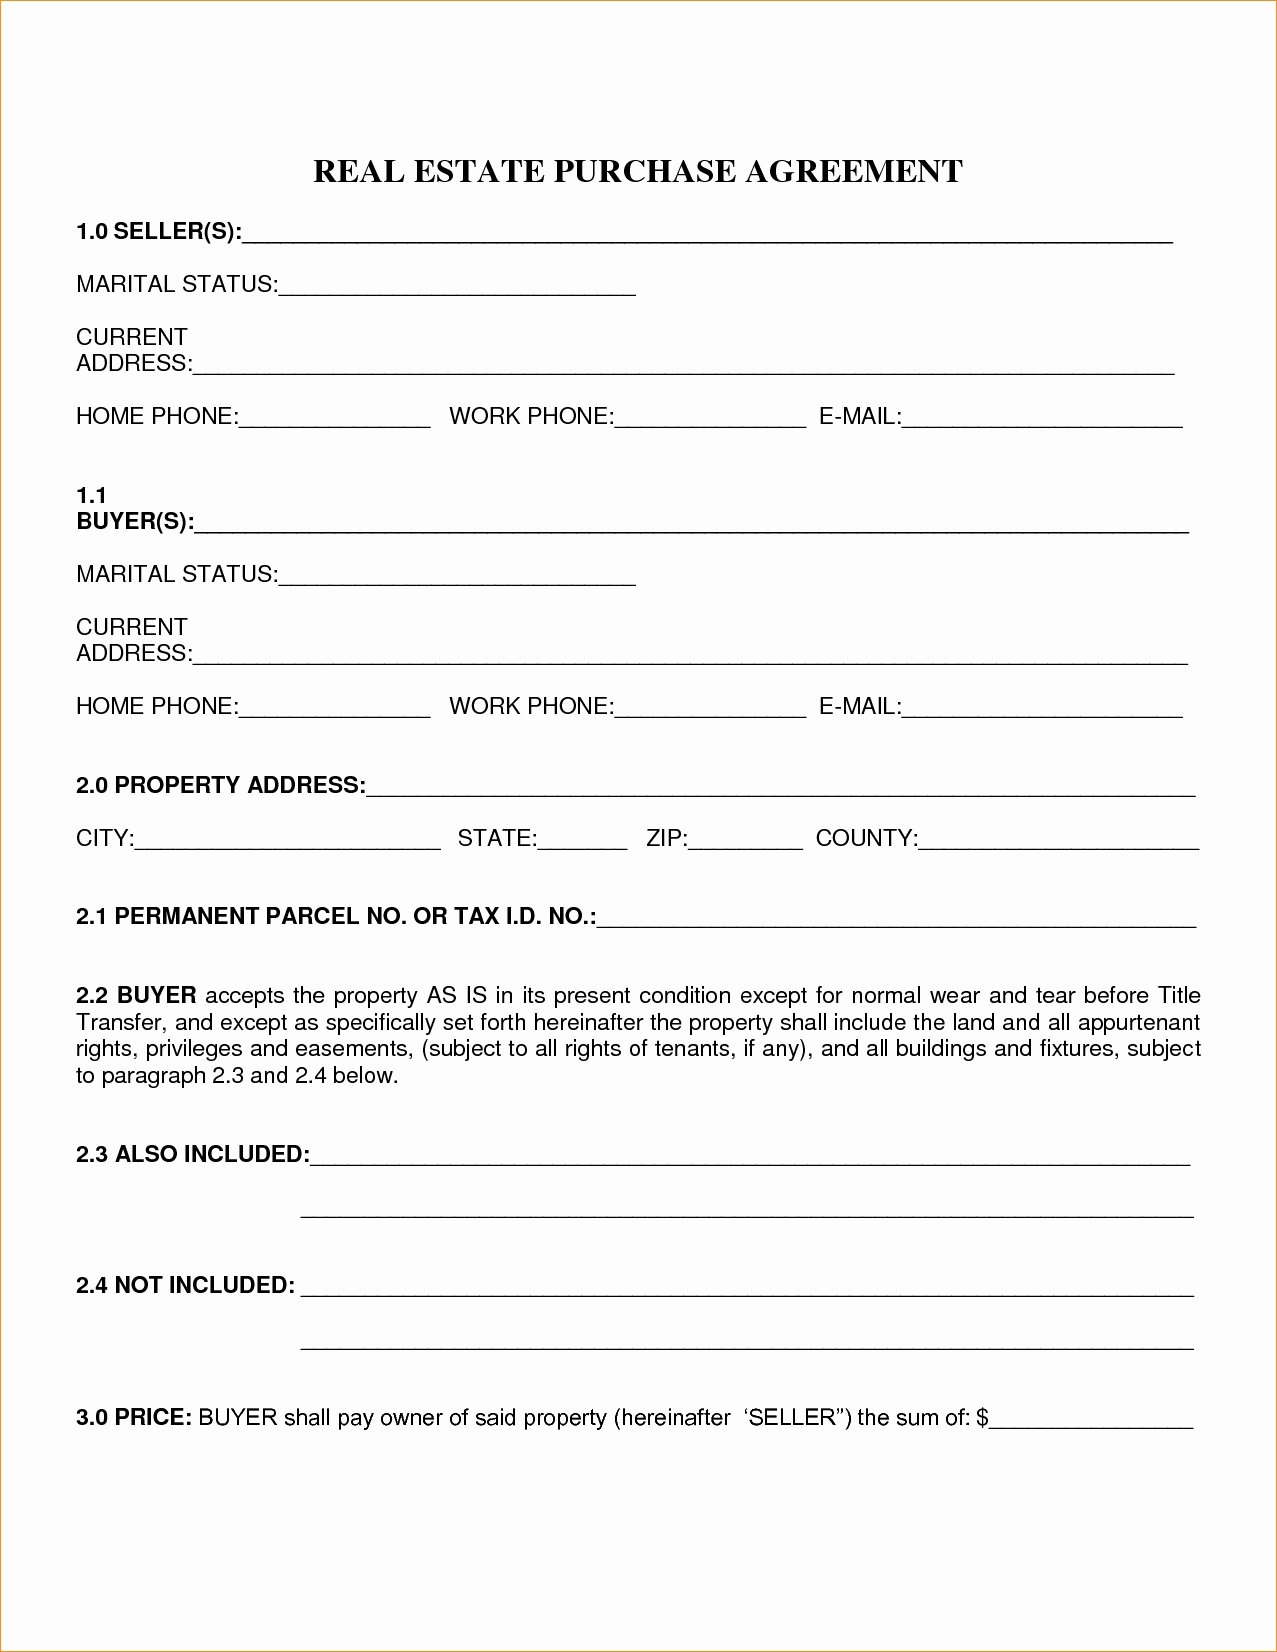 Real Estate Sales Contract Template Inspirational Property Buyout Agreement form Good Real Estate Purchase